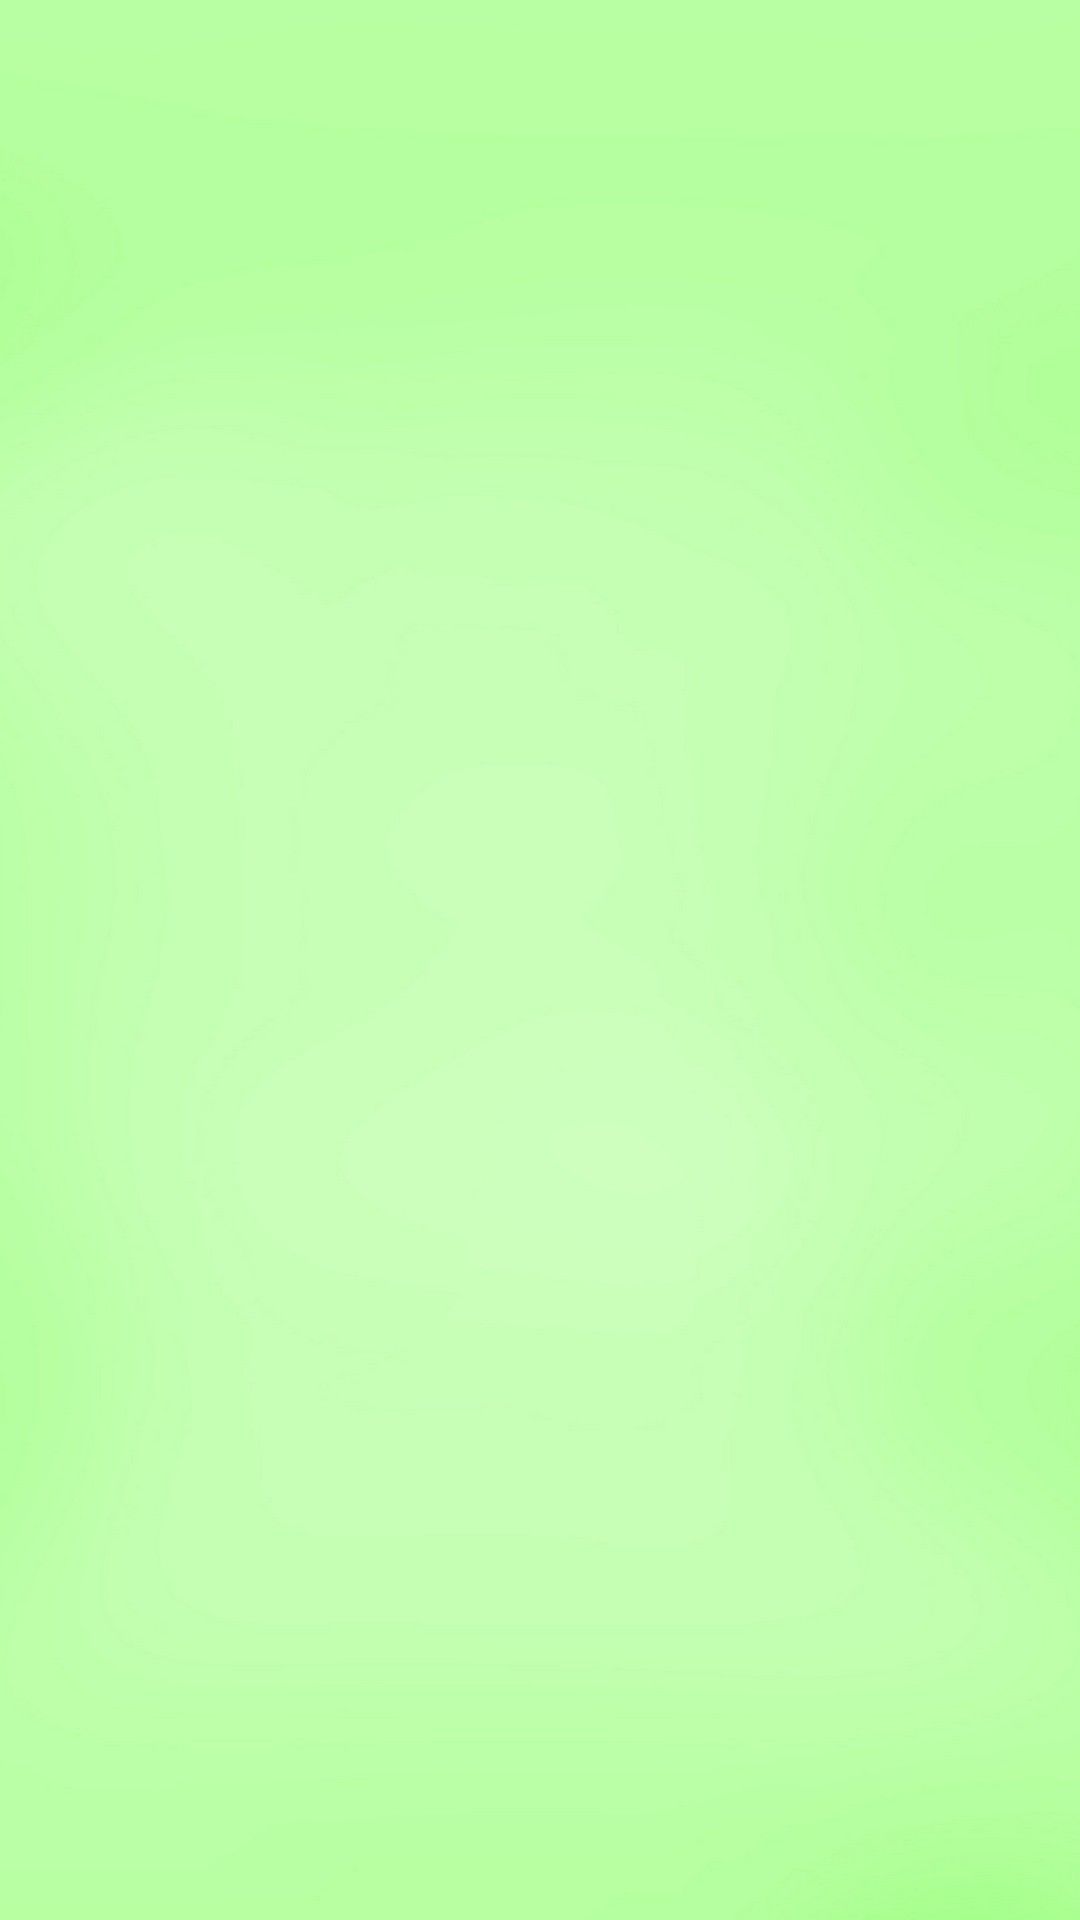 Wallpaper Light Green Android Android Wallpaper